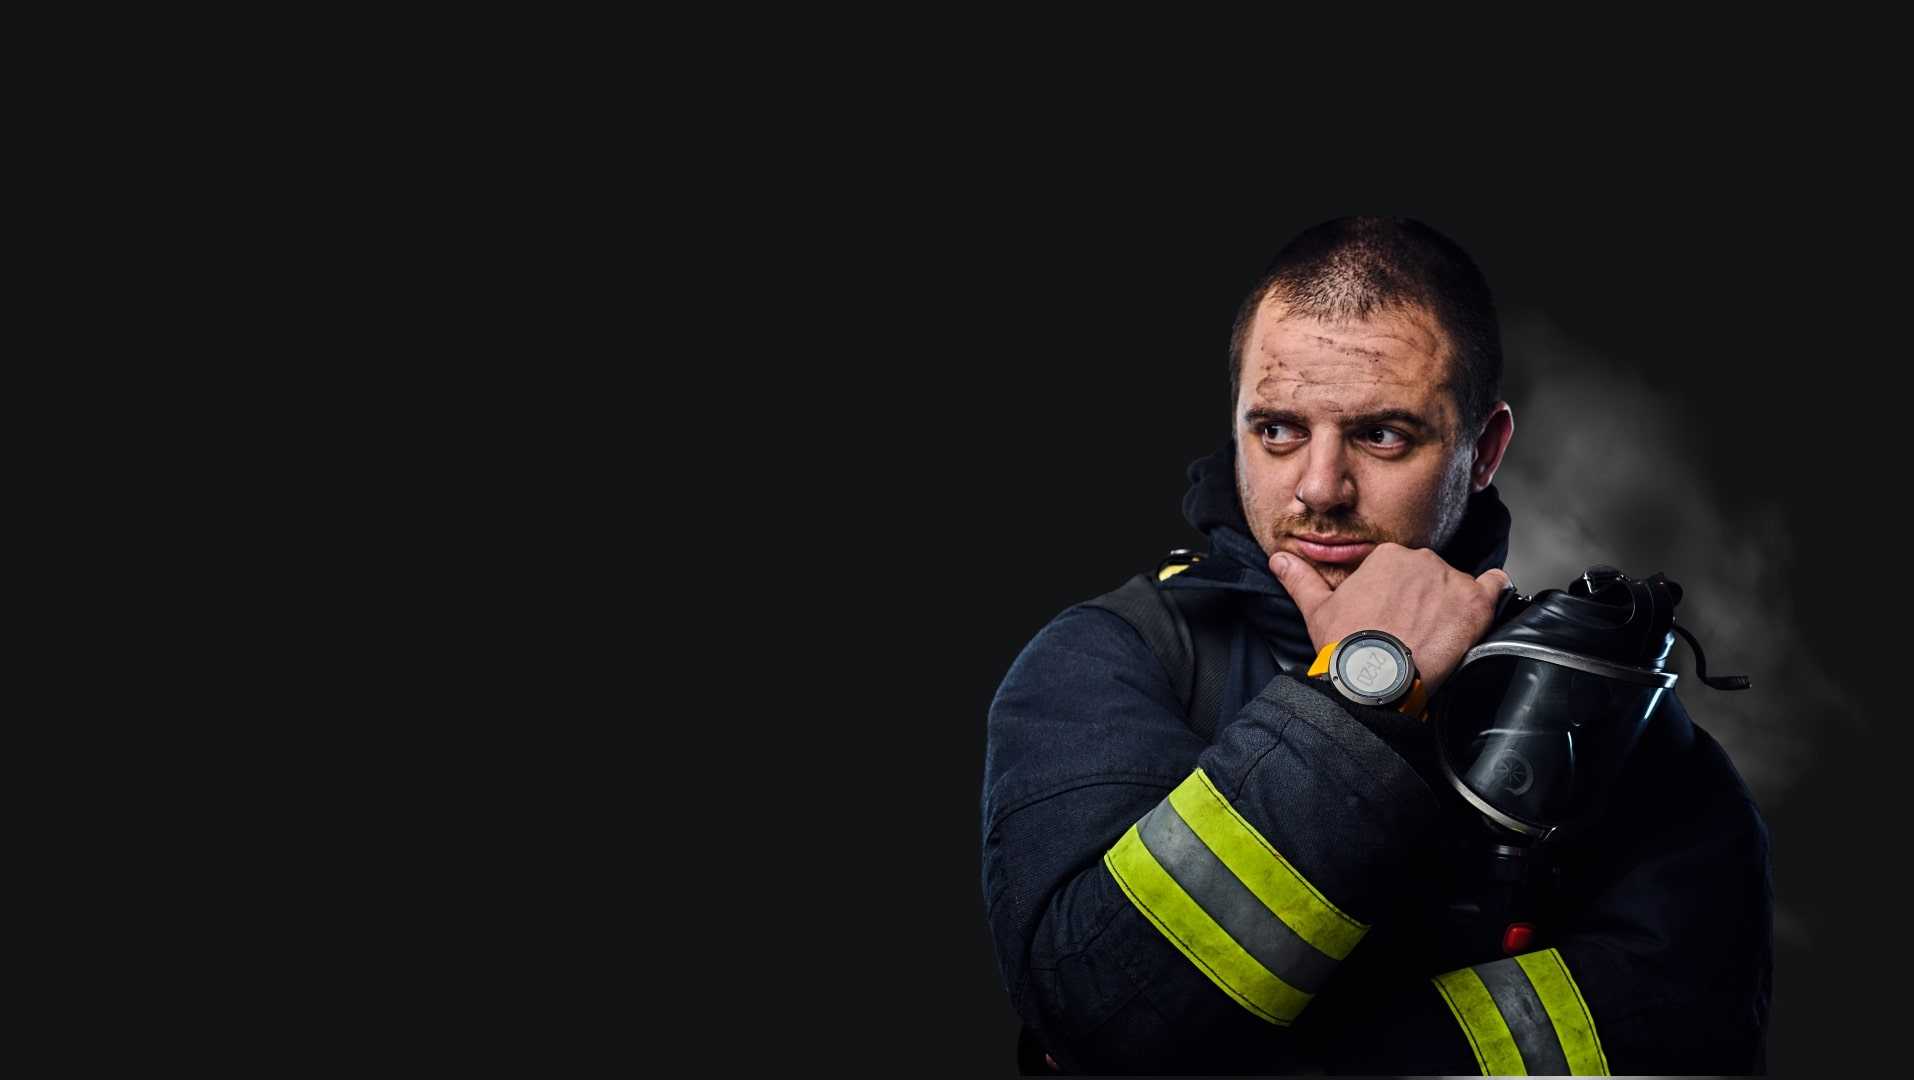 Firefighter without a helmet